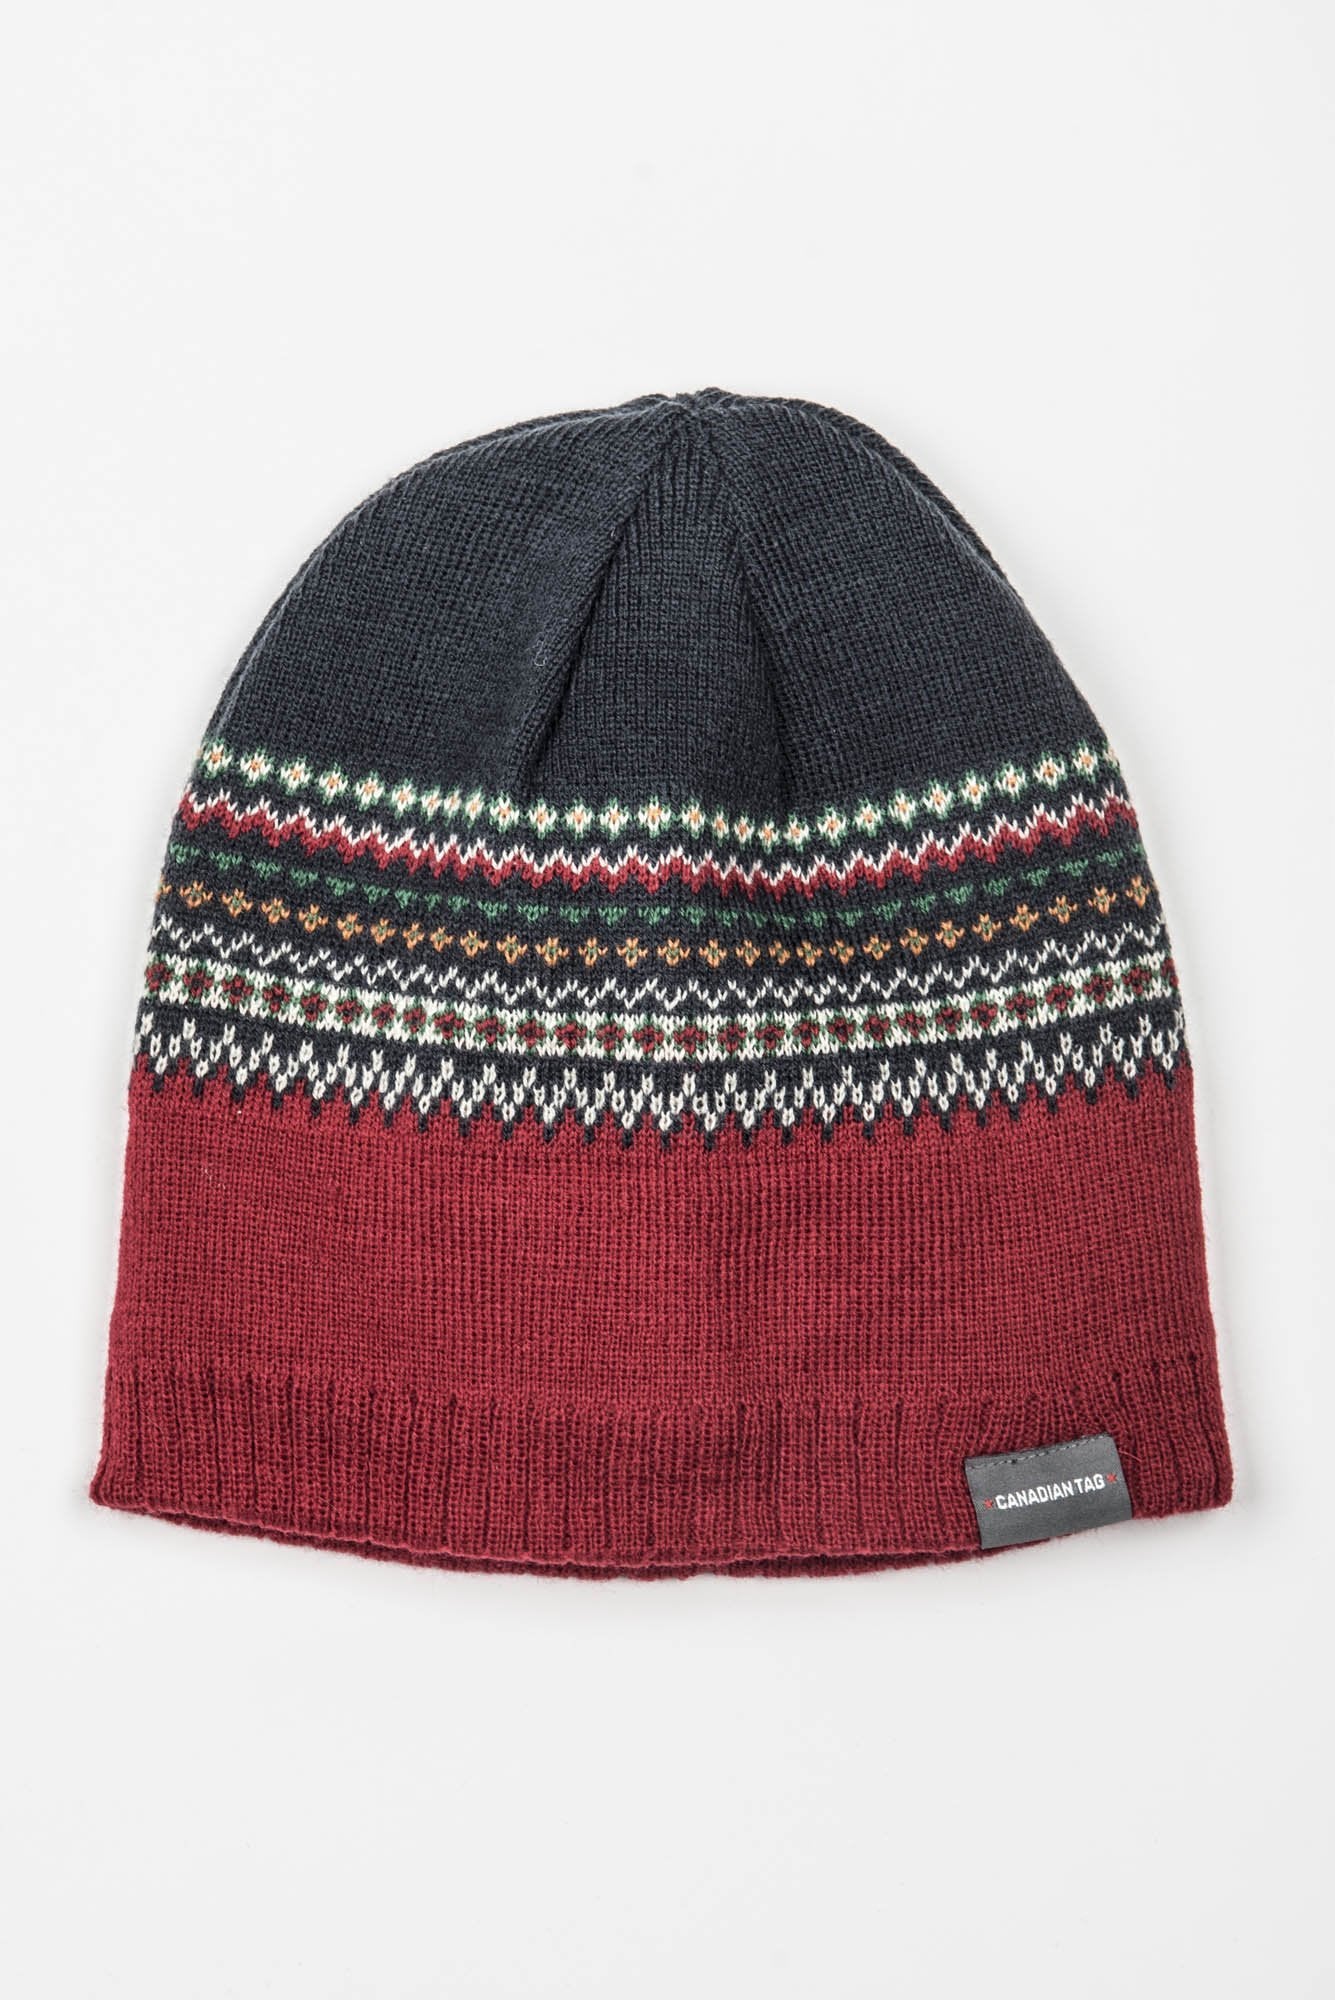 Canadian Tag-Tuque Shannon Unisex